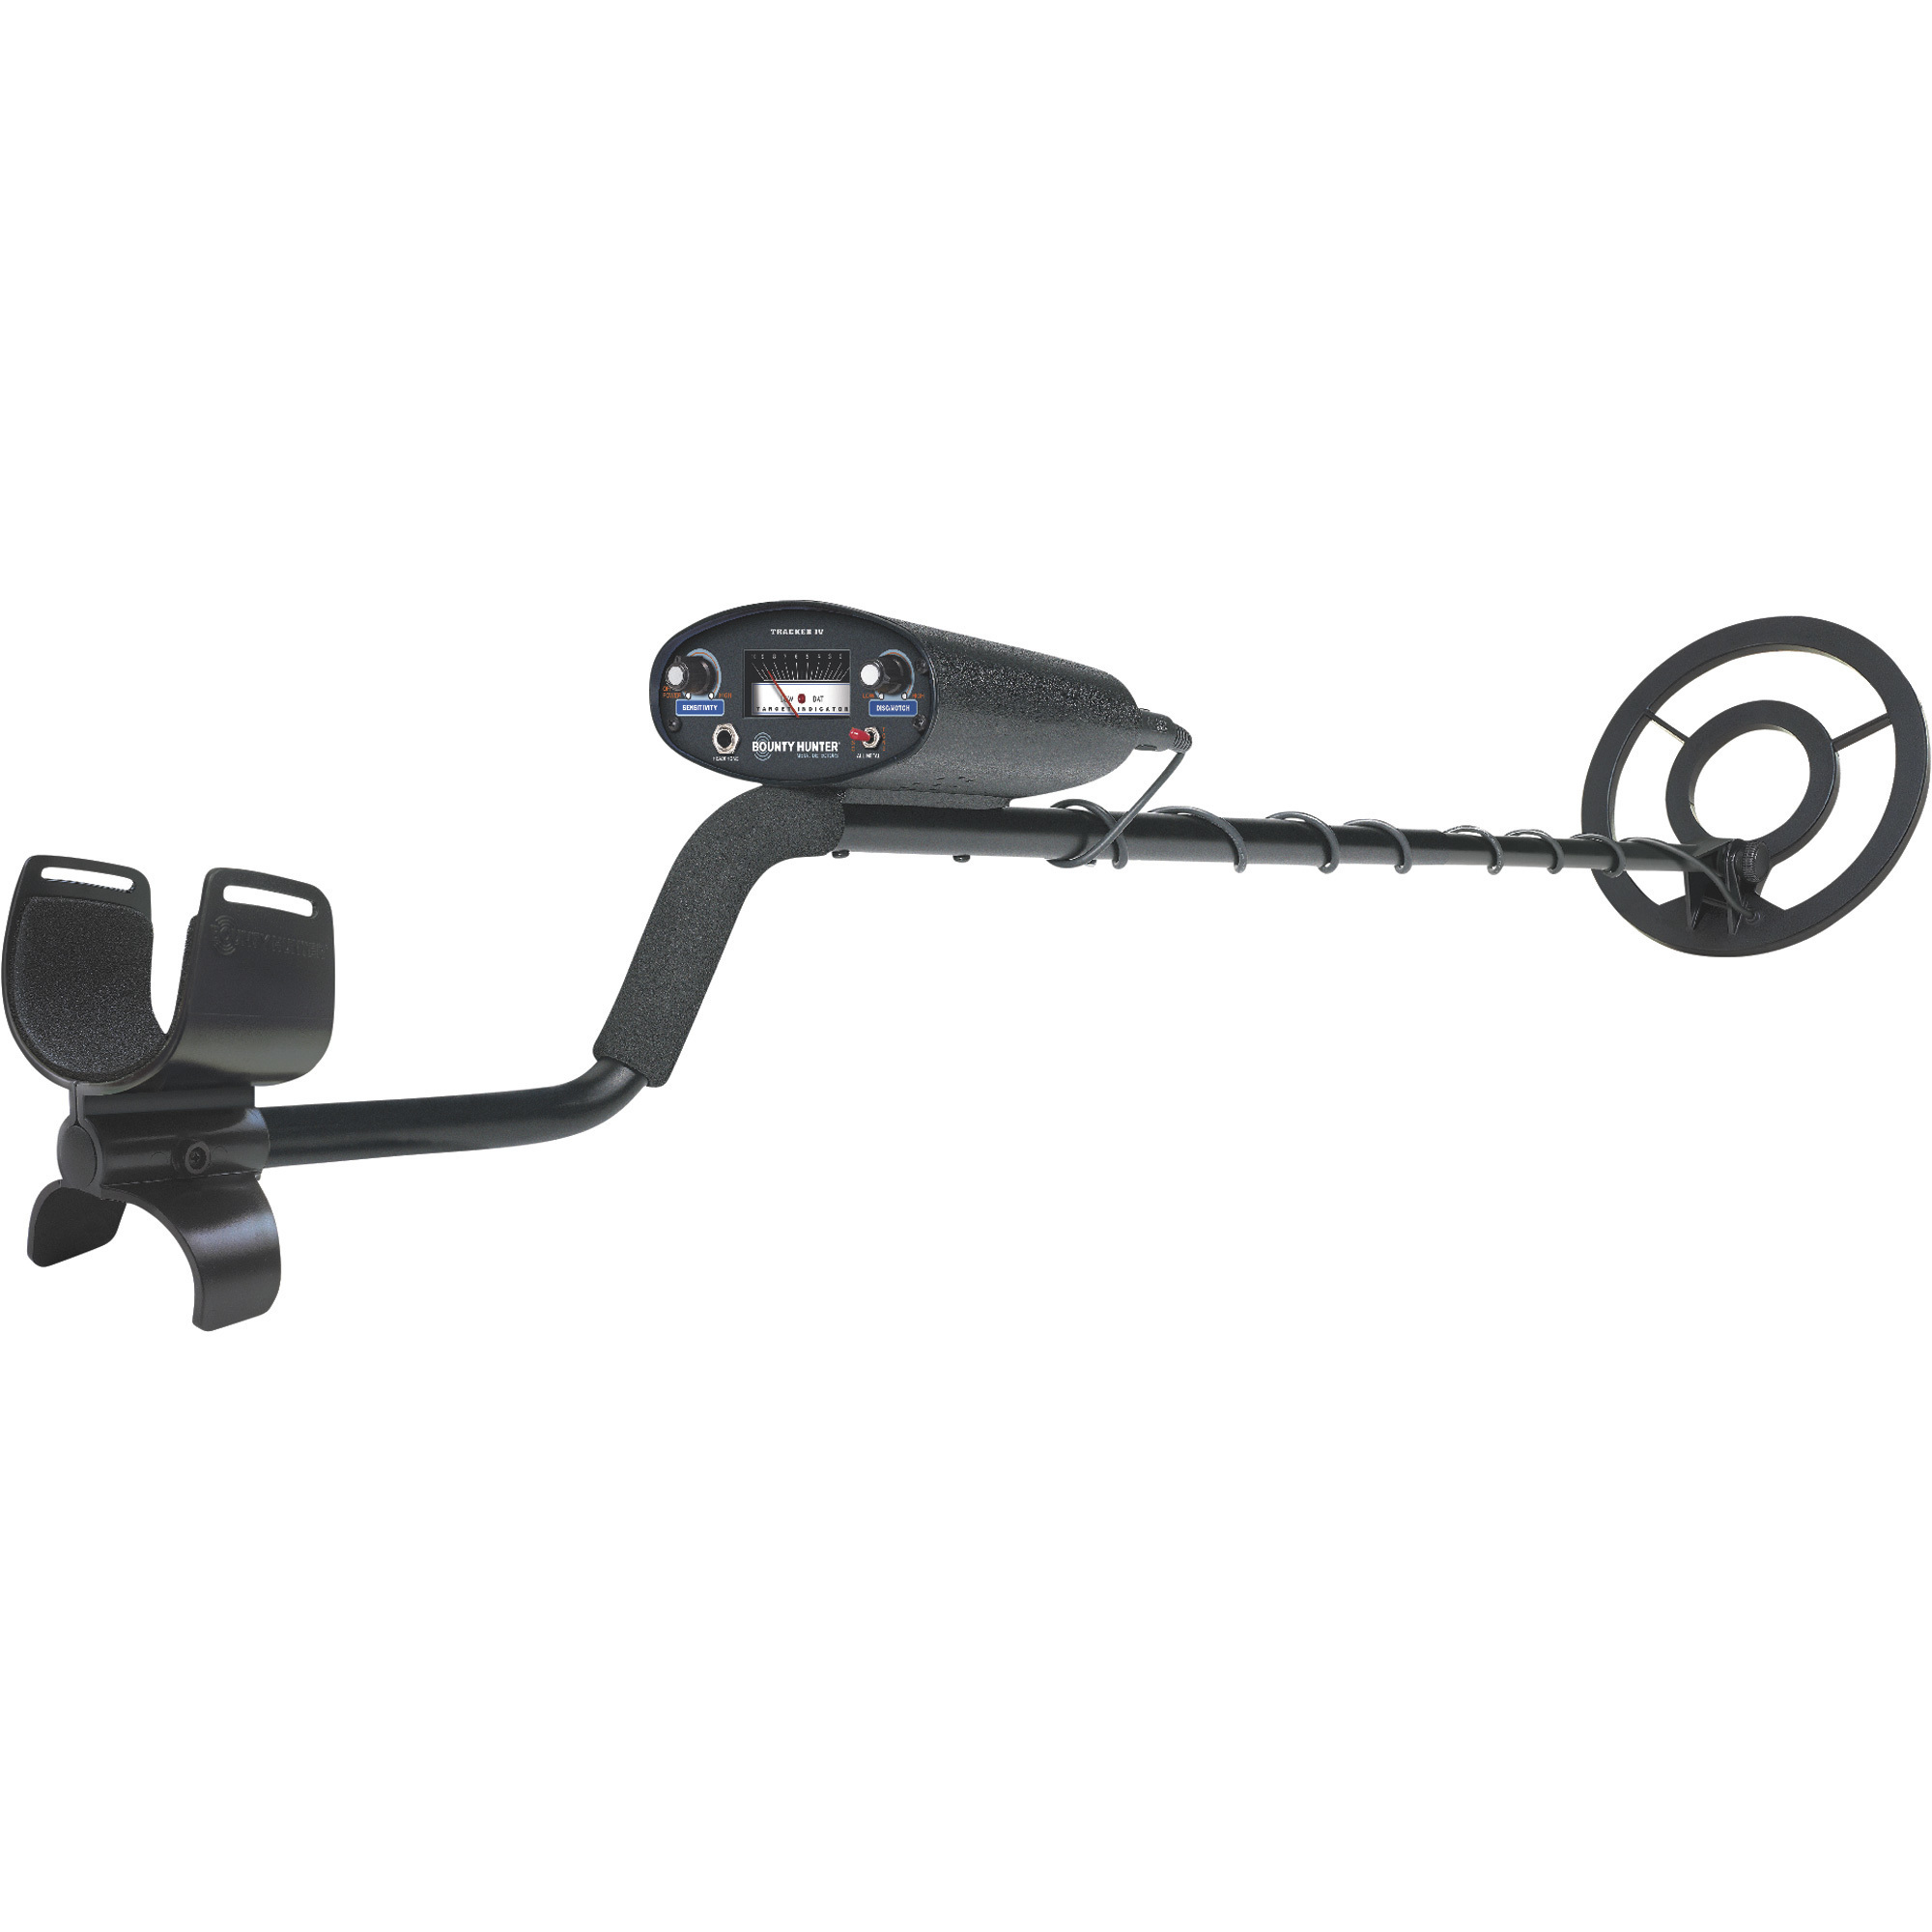 Bounty Hunter Tracker IV Metal Detector with Pouch and Digger â Model TK4GWP